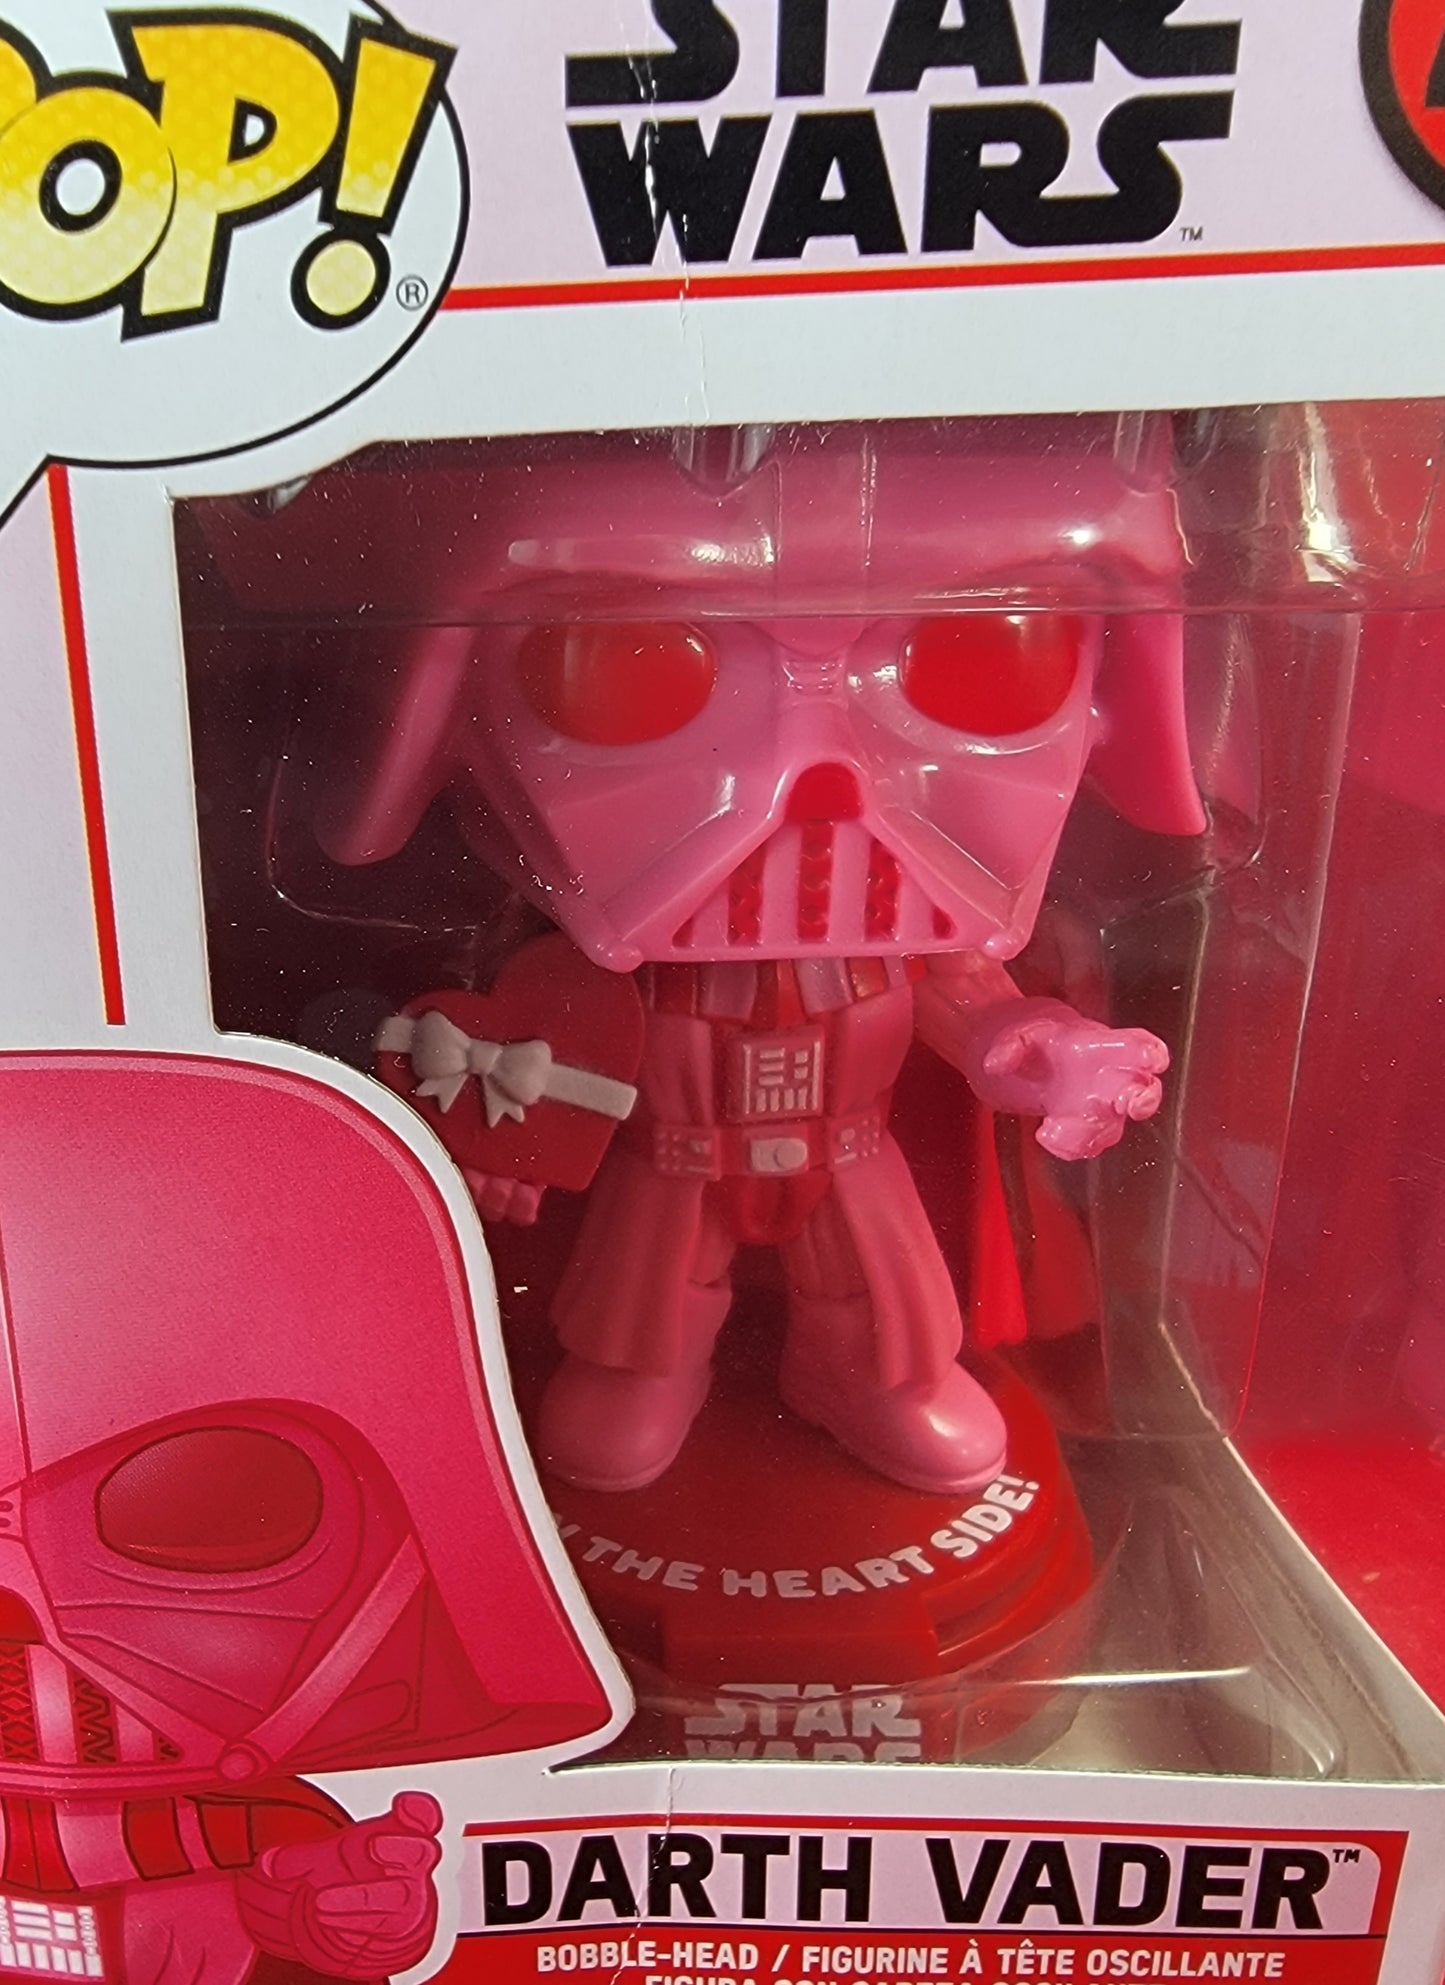 Darth Vader Valentine's Funko # 417 Star Wars (nib)
Darth vader with a box of chocolates and the words "join the heart side  !"  Box has some damage so please refer to pictures.  Pop will be Shipped in a compatible pop protector.